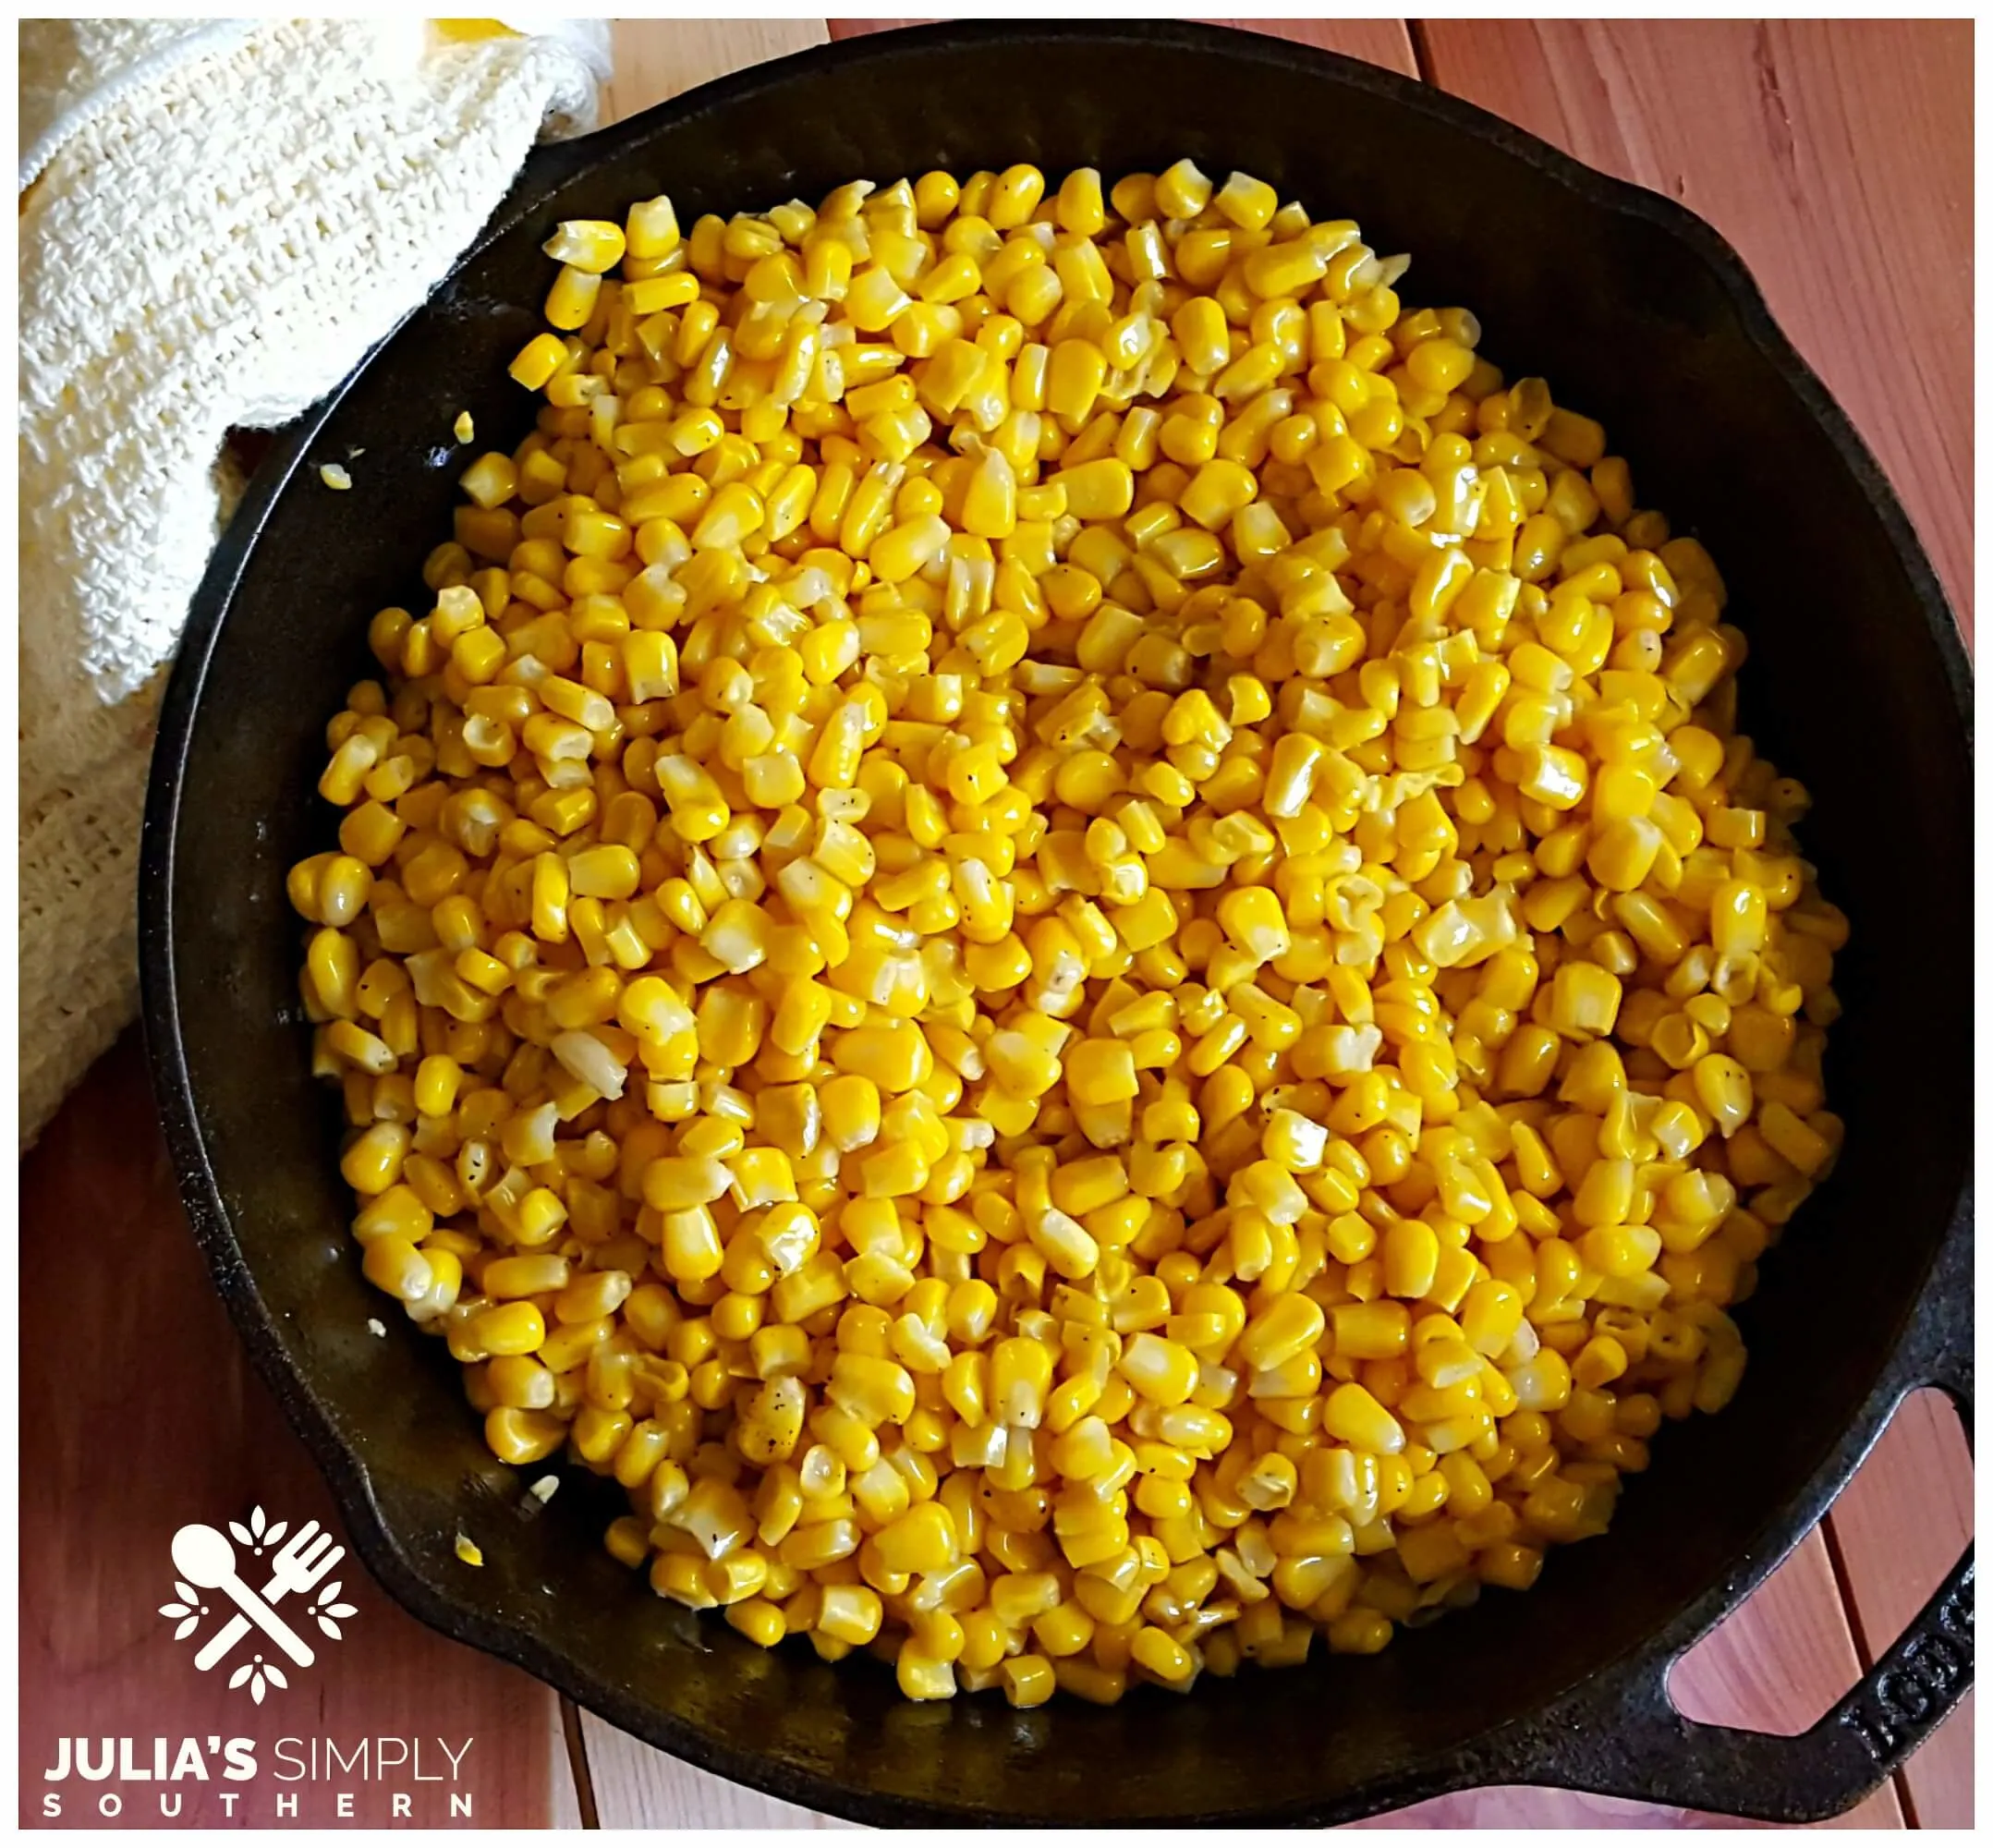 Southern fried corn in a cast iron skillet